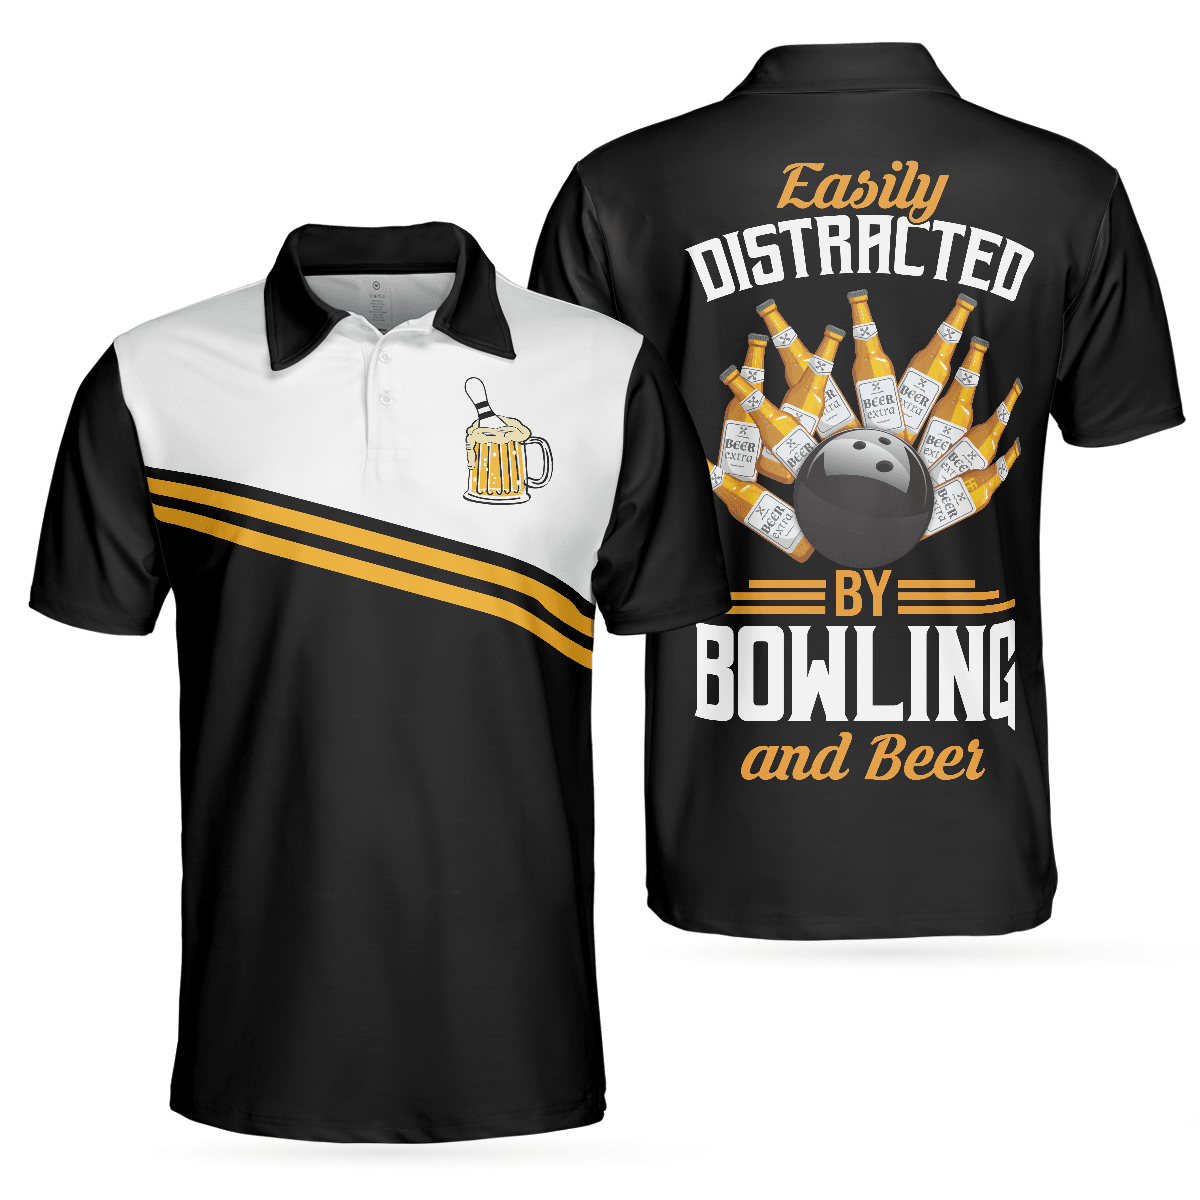 Easily Distracted By Bowling And Beer Polo Shirt, Tenpin Bowling Shirt Design With Sayings, Best Drinking Bowling Shirt, Polo Shirt Gift For Beer Lovers - Amzanimalsgift